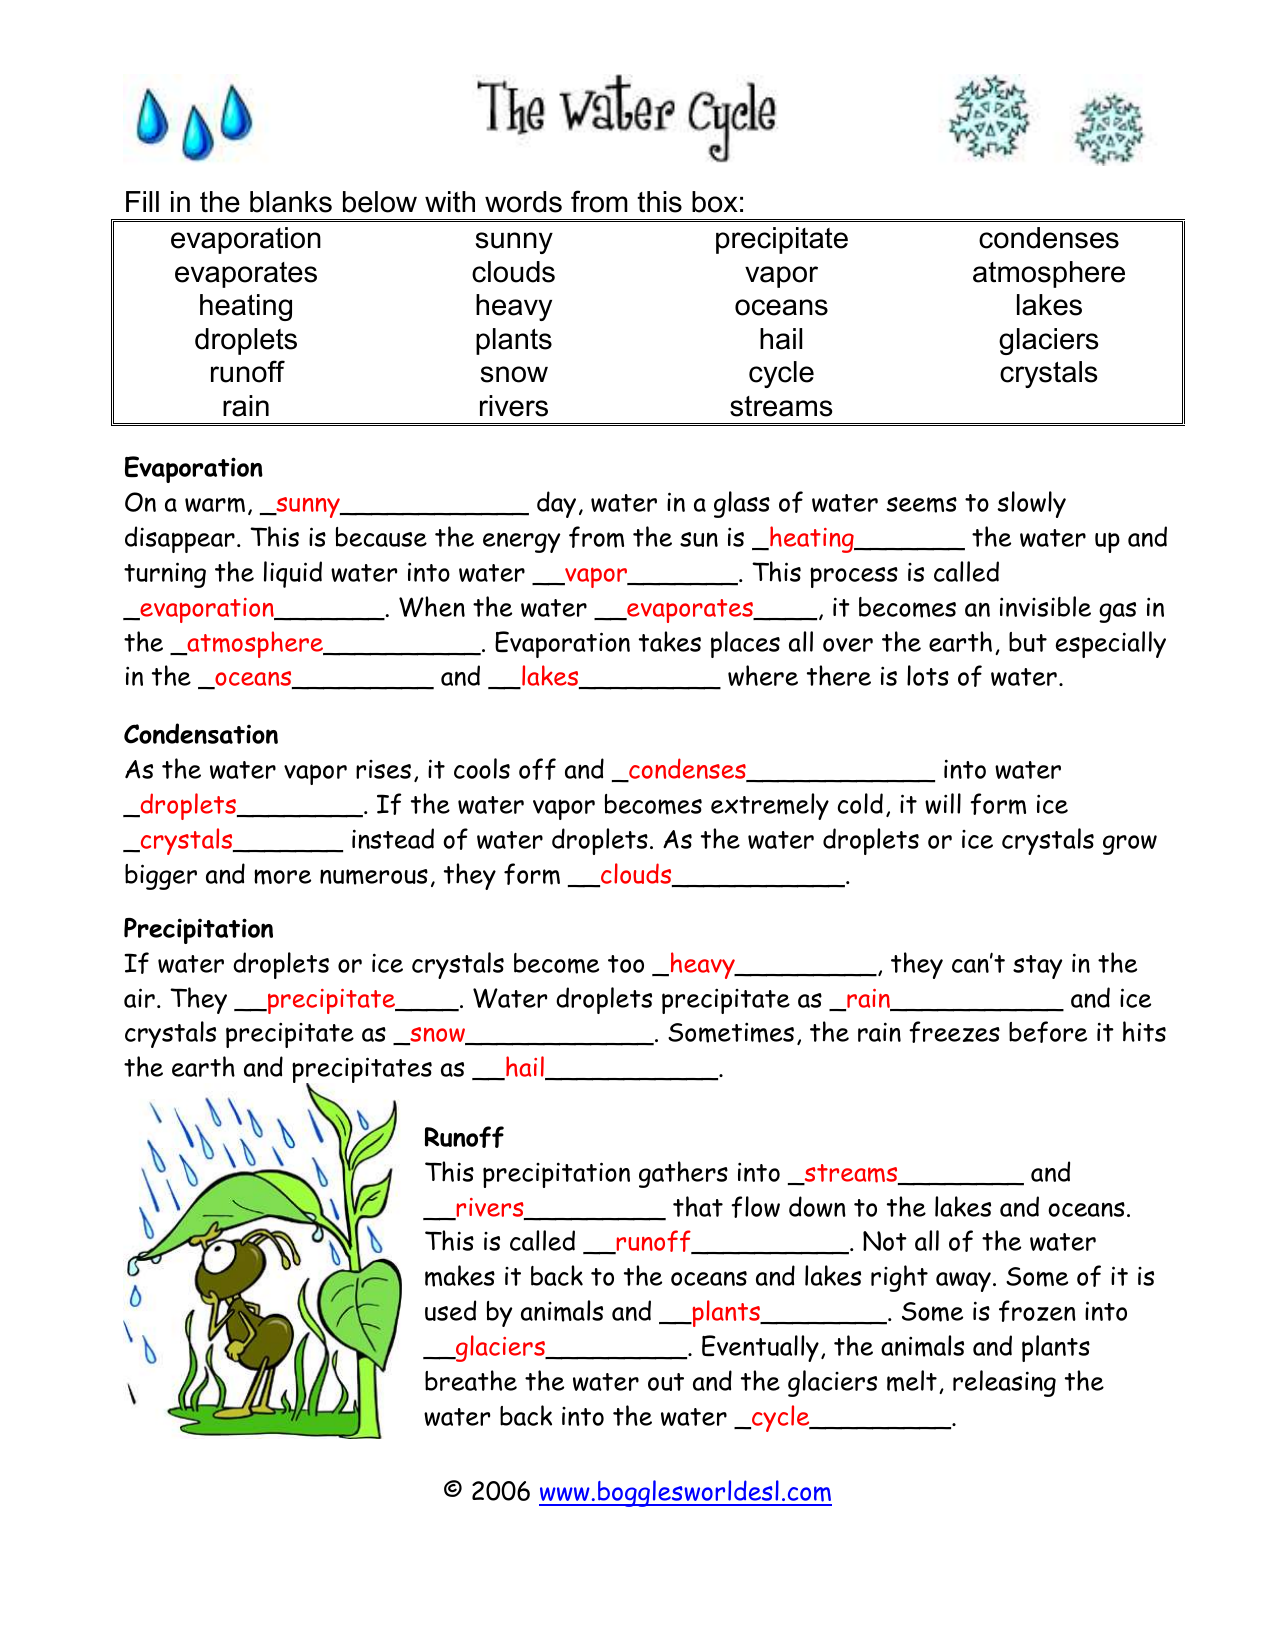 The Water Cycle Worksheet Answers Worksheets For Home Learning